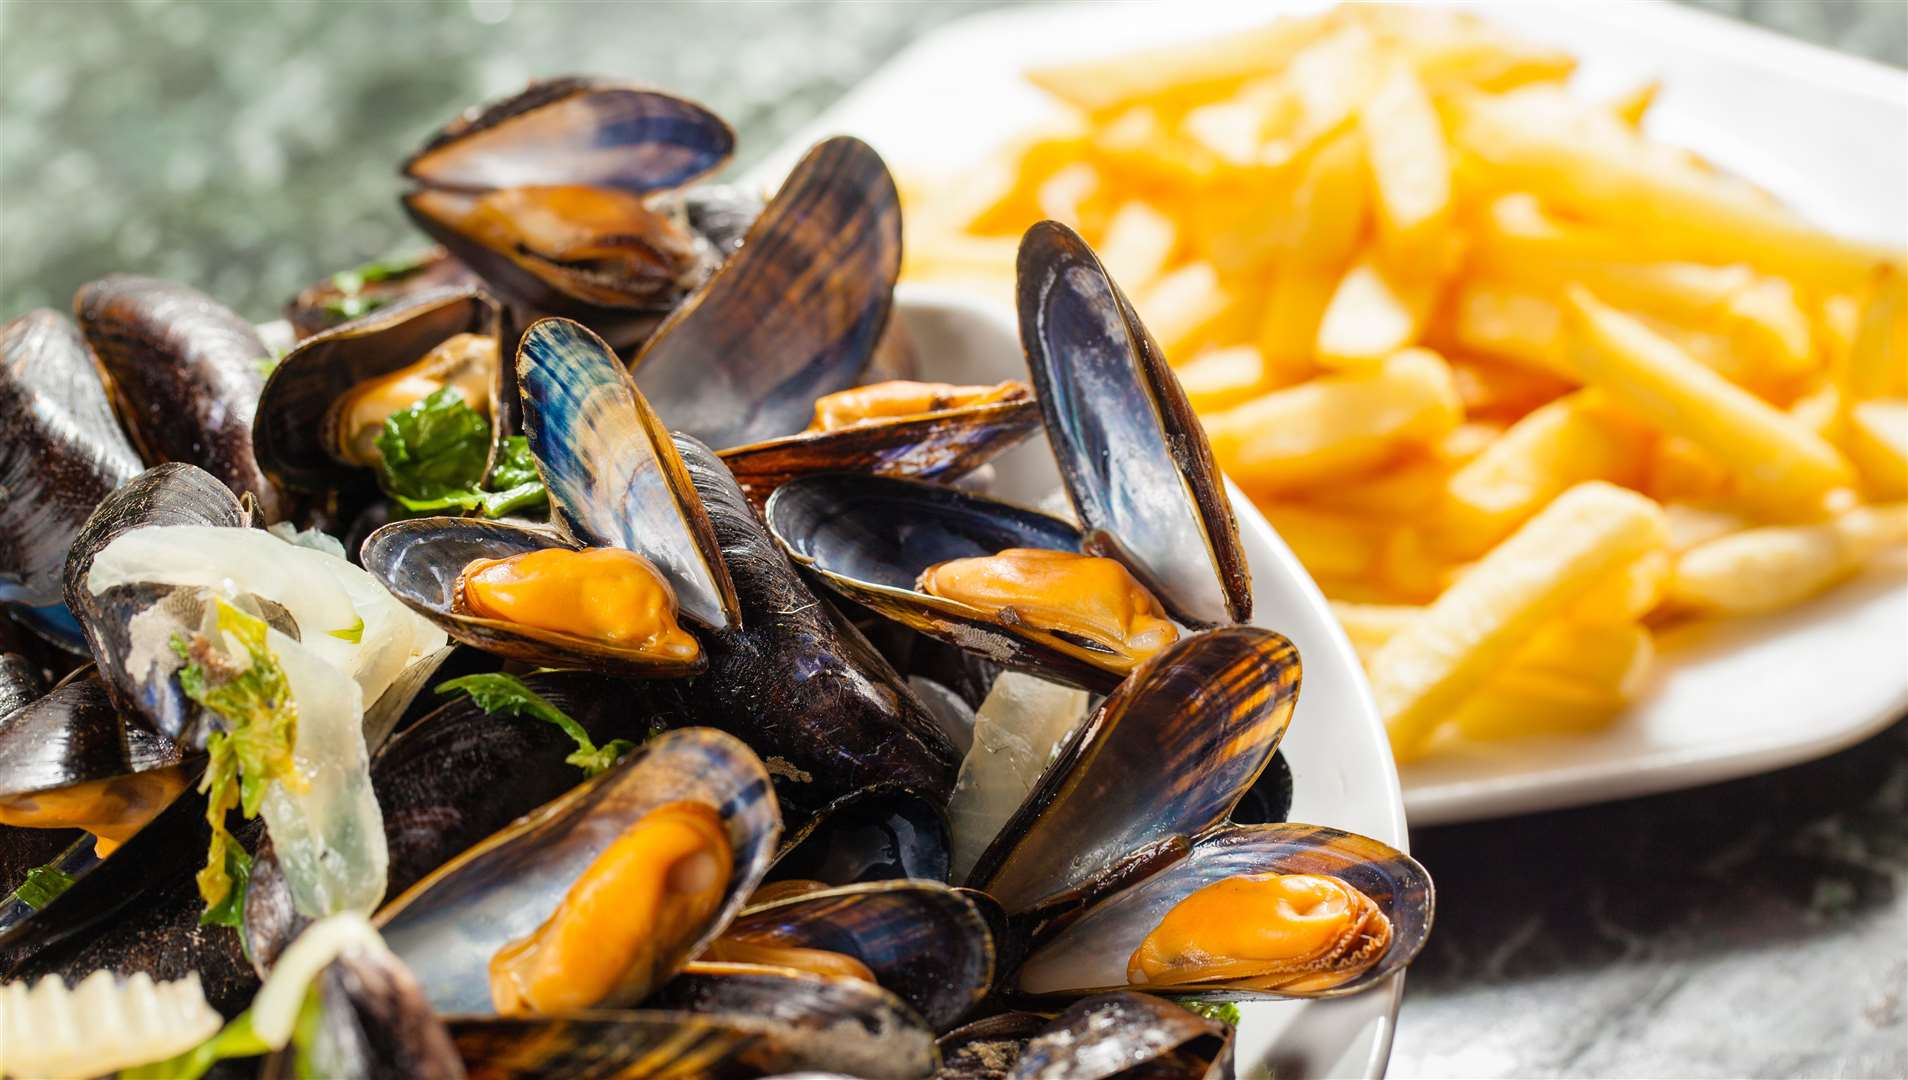 A local favourite, Belgians steam and then serve mussels in a casserole pot accompanied with chips.